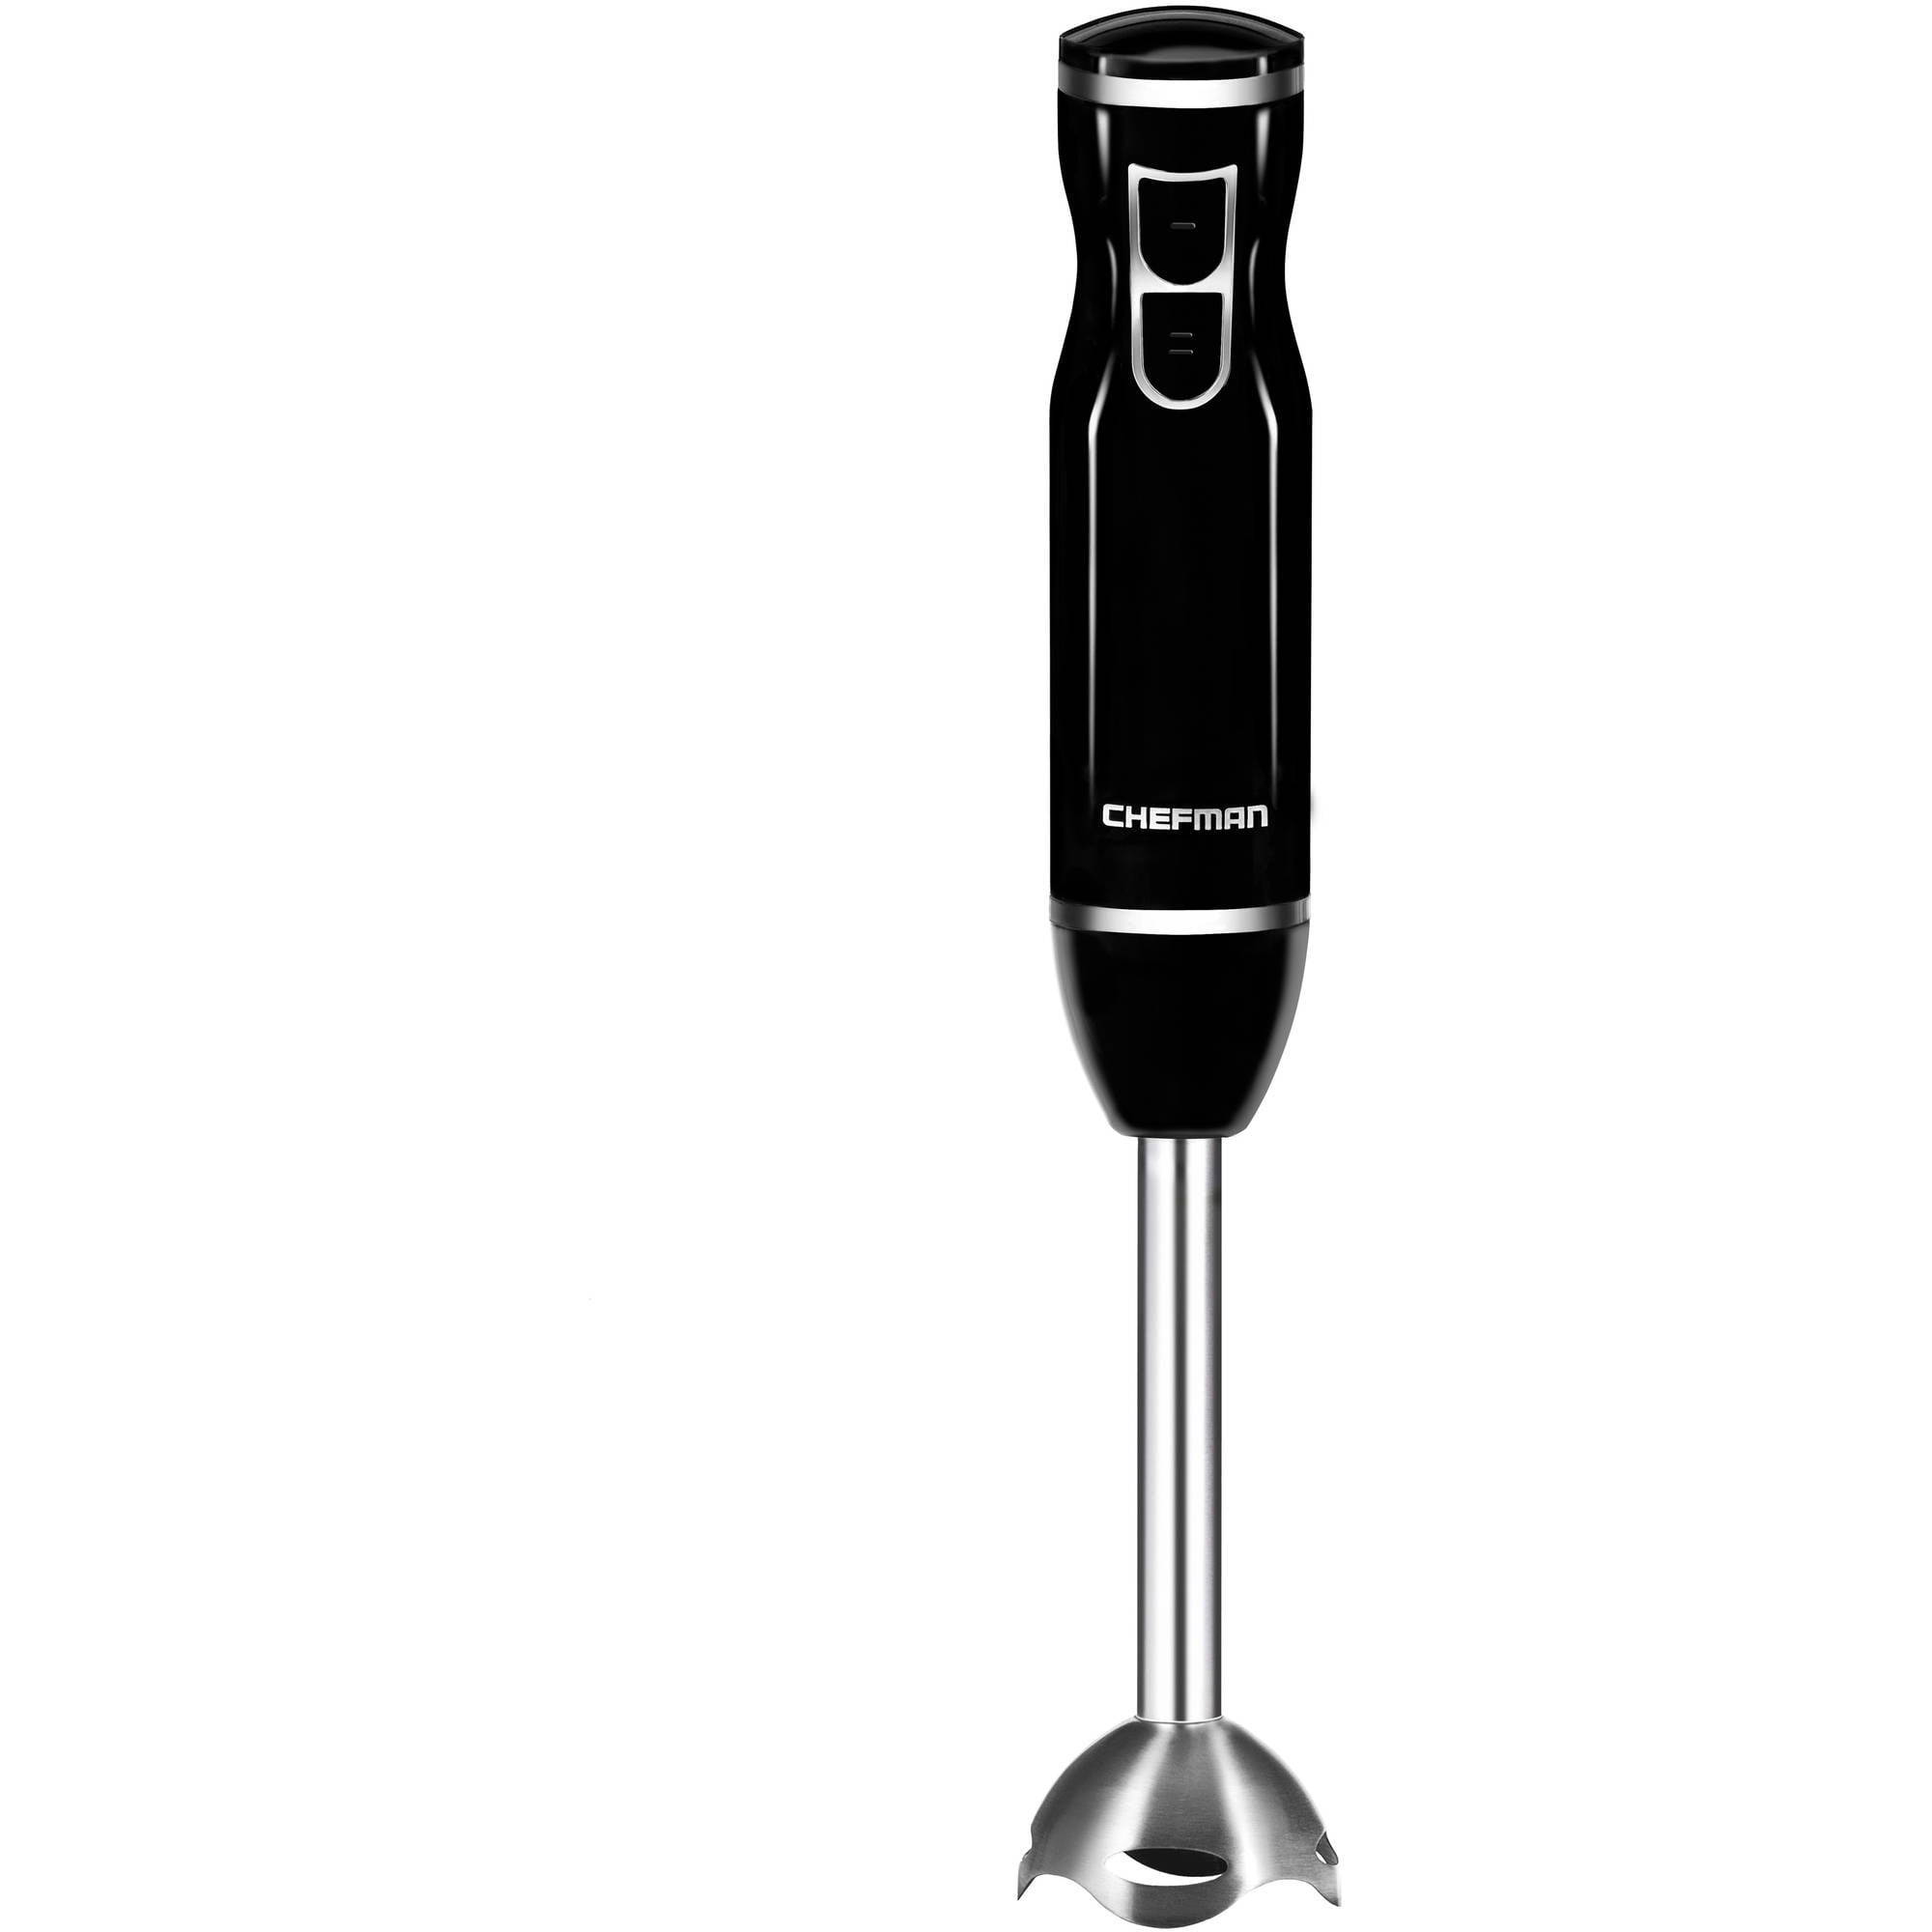  Crux Cordless Hand Immersion Blender, 7.5 inch Blending Arm,  Mix, Whip, Puree Sauces/Soups, Rechargeable, Easy to Clean, Dishwasher Safe  Removeable Parts, Stainless Steel/Black, 14790: Home & Kitchen